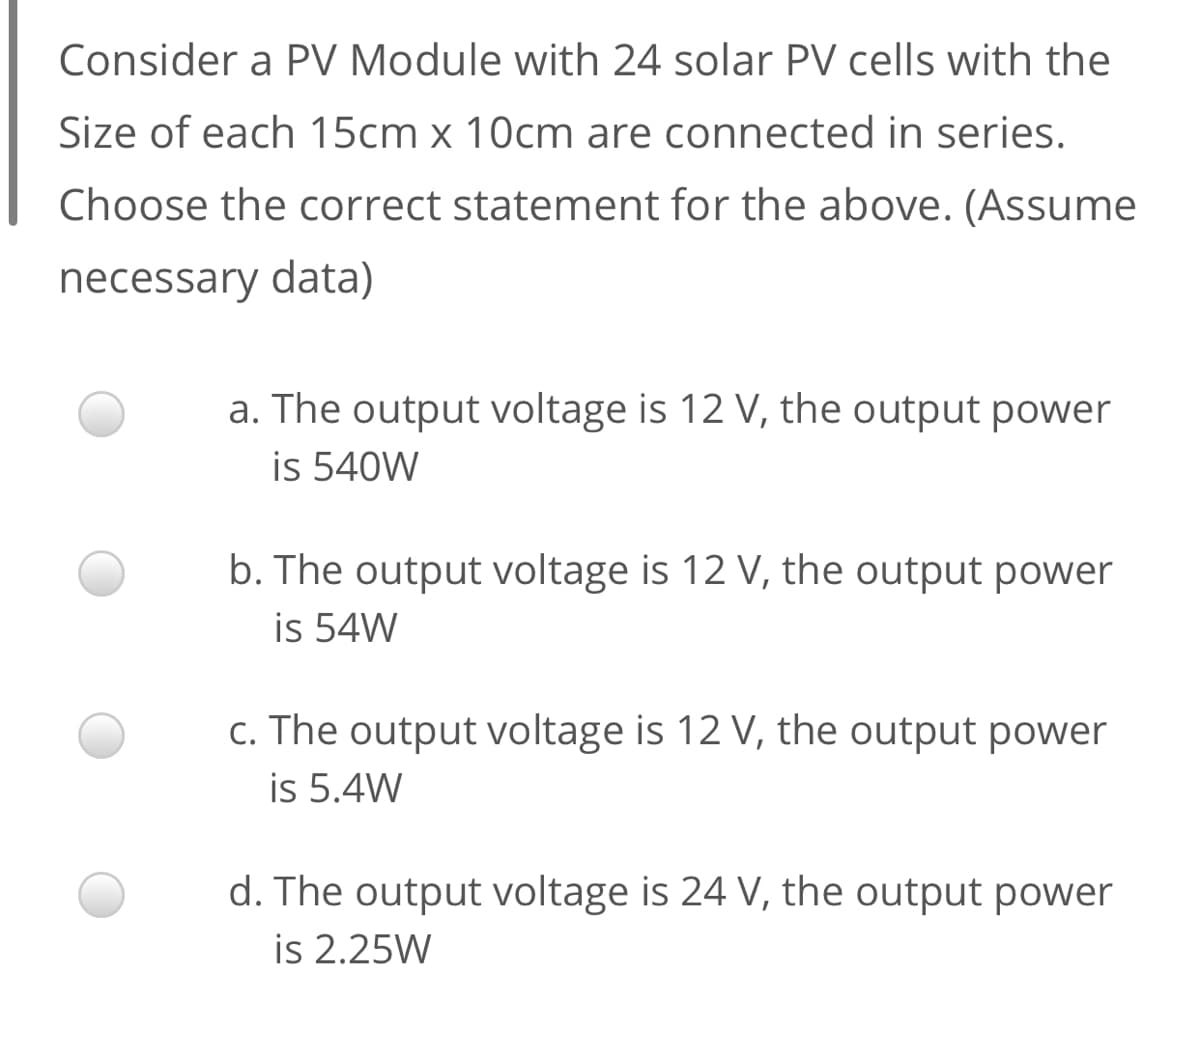 Consider a PV Module with 24 solar PV cells with the
Size of each 15cm x 10cm are connected in series.
Choose the correct statement for the above. (Assume
necessary data)
a. The output voltage is 12 V, the output power
is 540W
b. The output voltage is 12 V, the output power
is 54W
c. The output voltage is 12 V, the output power
is 5.4W
d. The output voltage is 24 V, the output power
is 2.25W
